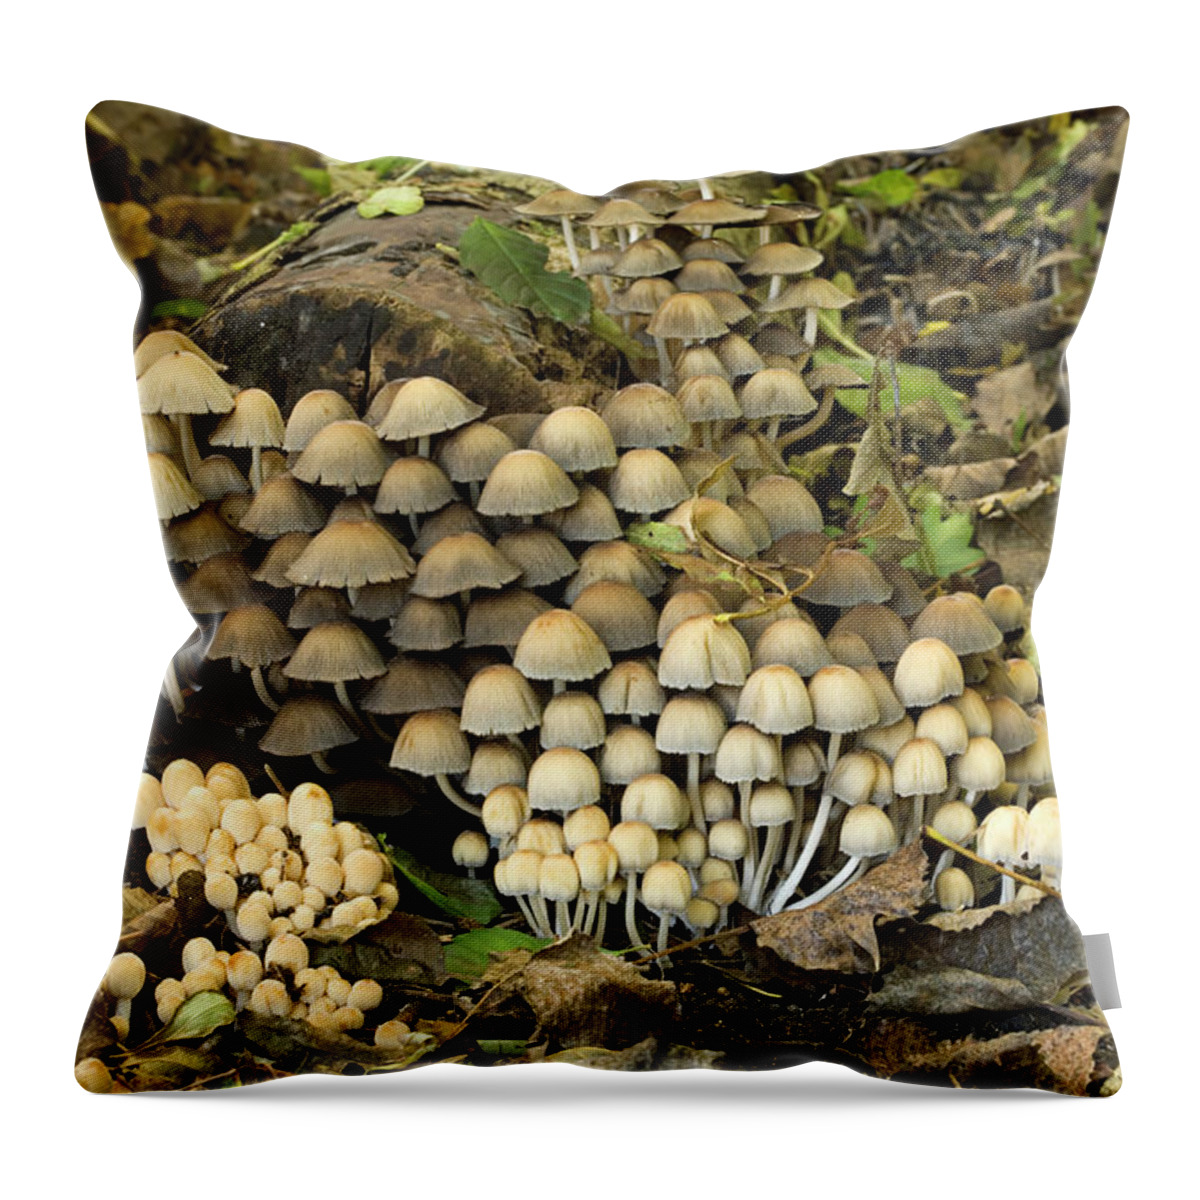 Netherlands Throw Pillow featuring the photograph Fairies Bonnet Mushrooms Coprinus by Roel Meijer